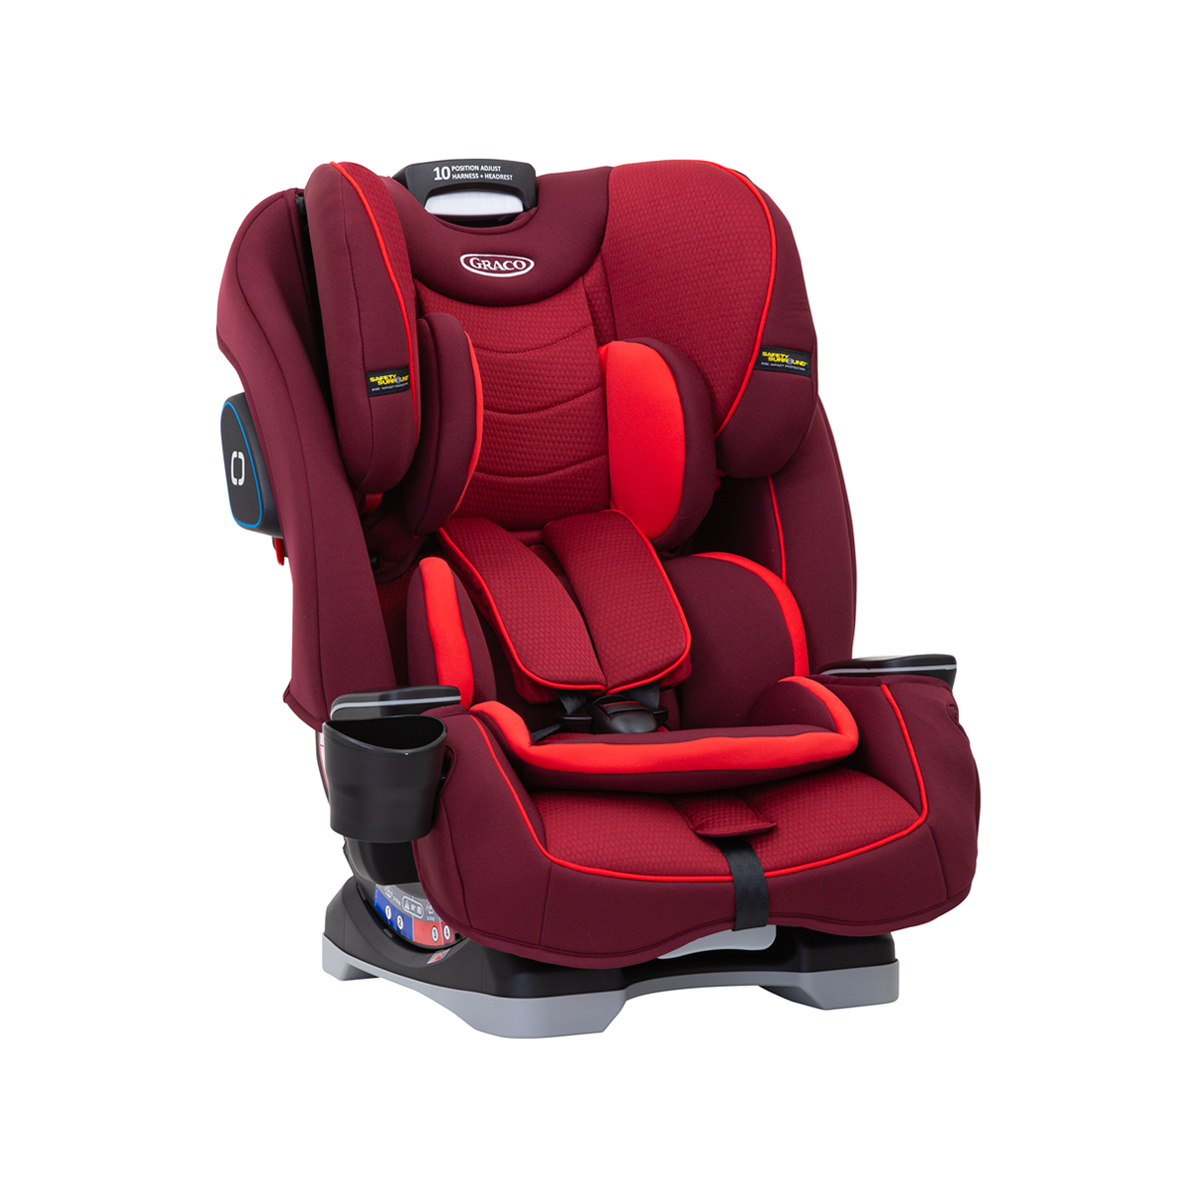 https://dd.gracobaby.eu/media/catalog/product/s/l/slimfit_chili-prod1_1.jpg?type=product&height=90&width=90